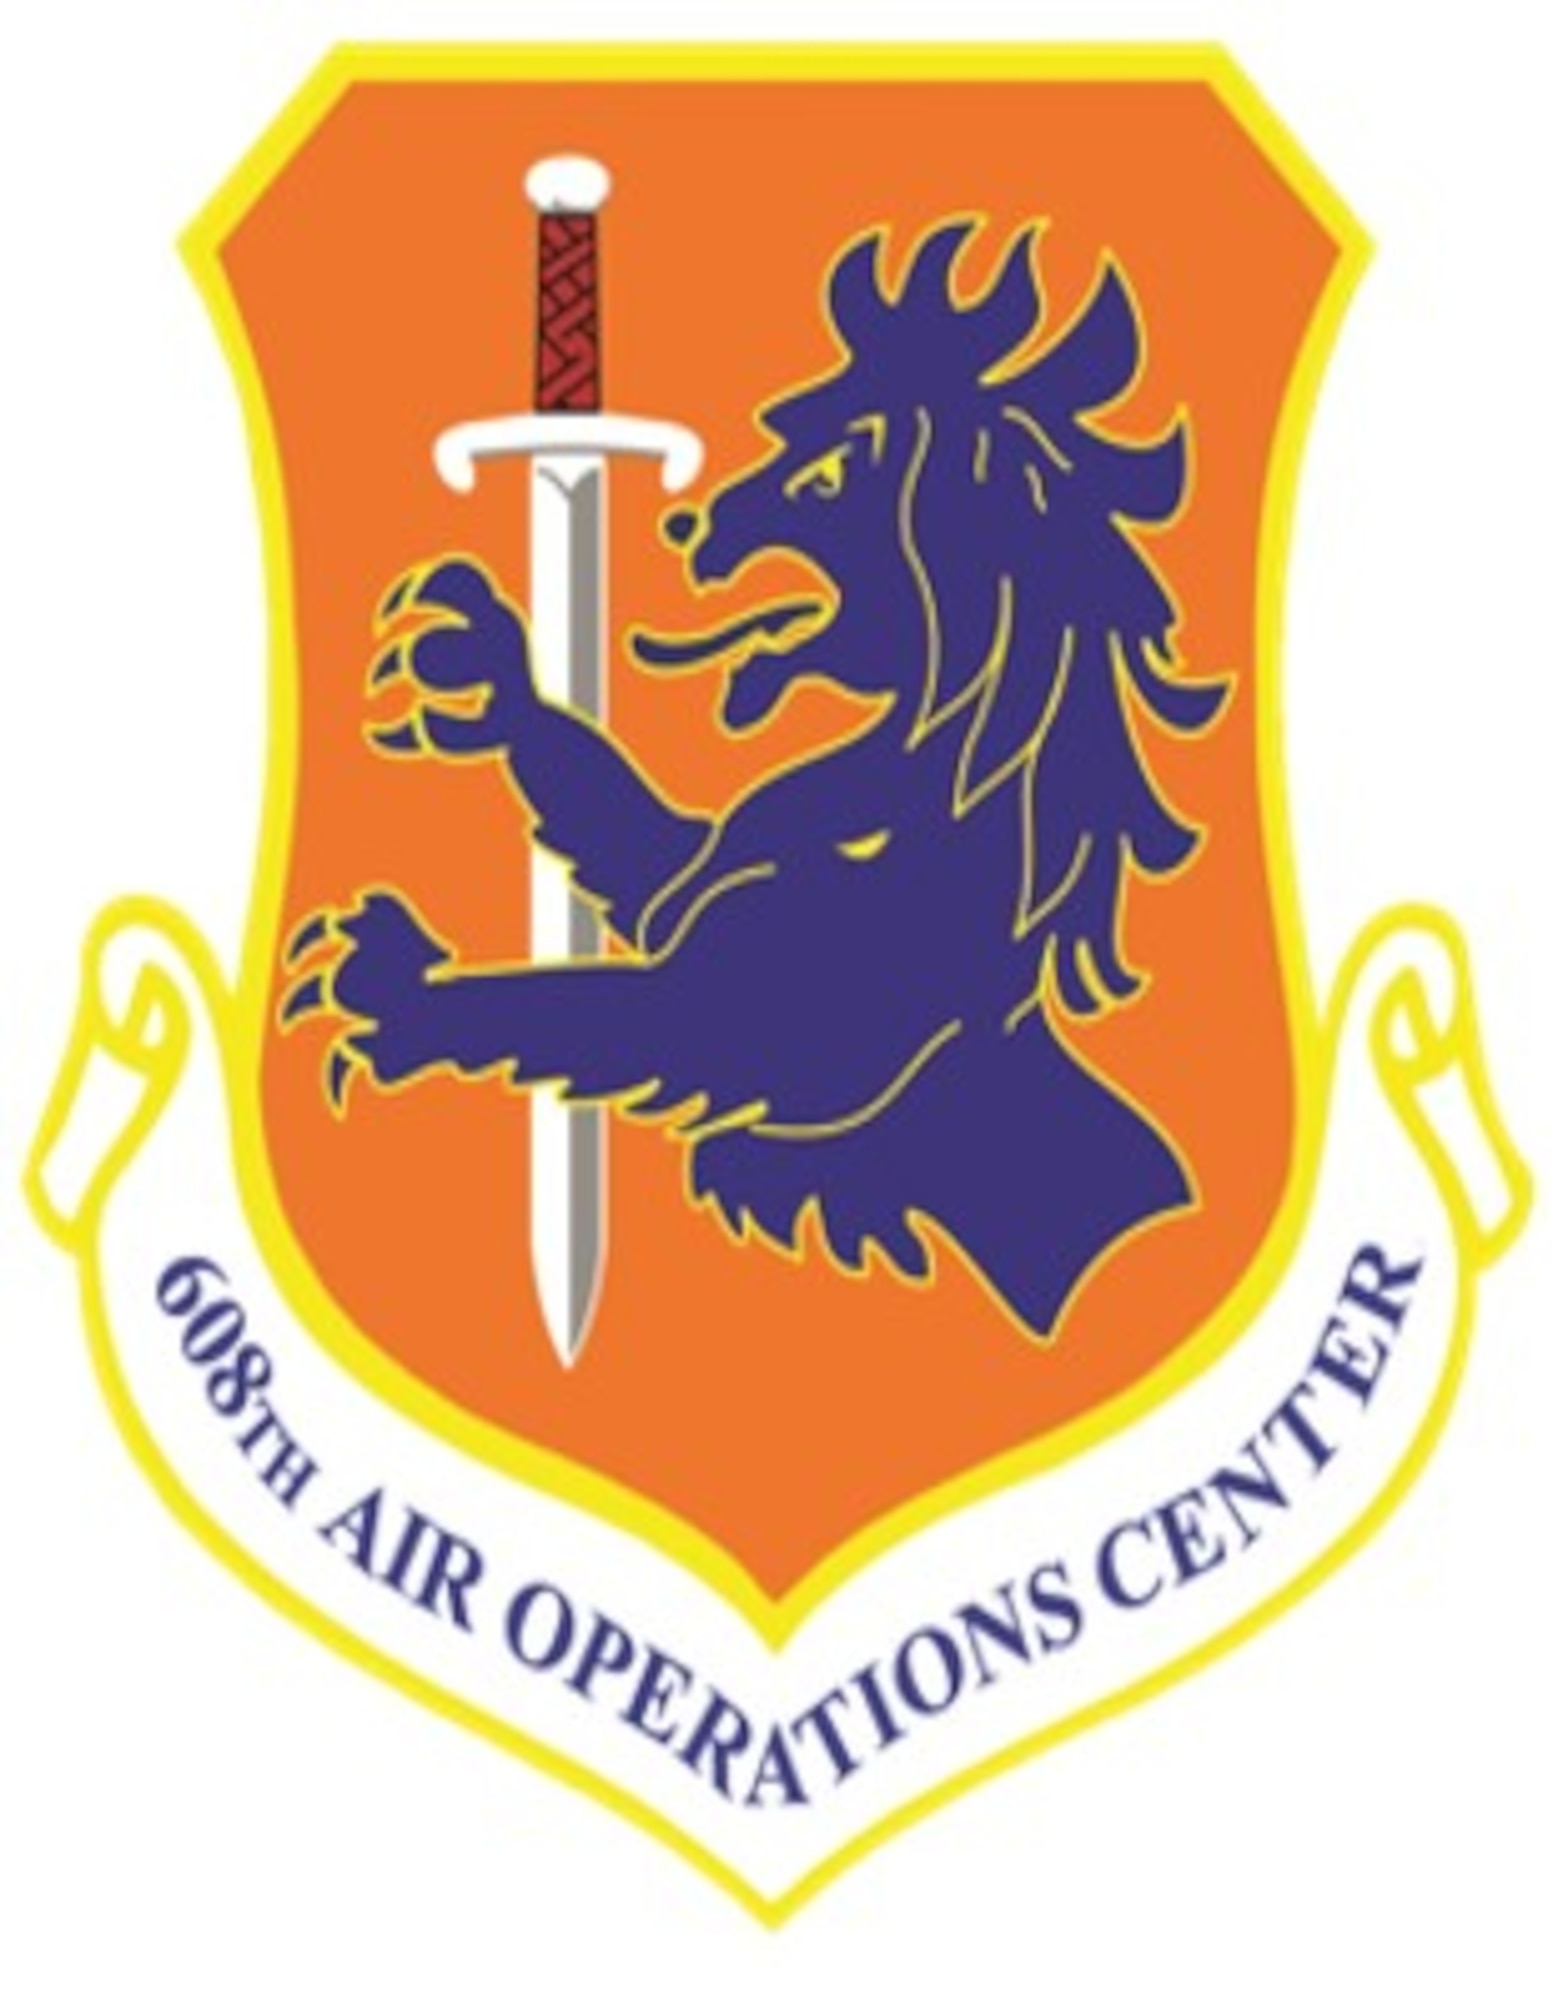 608th Air Operations Center, Barksdale AFB, LA